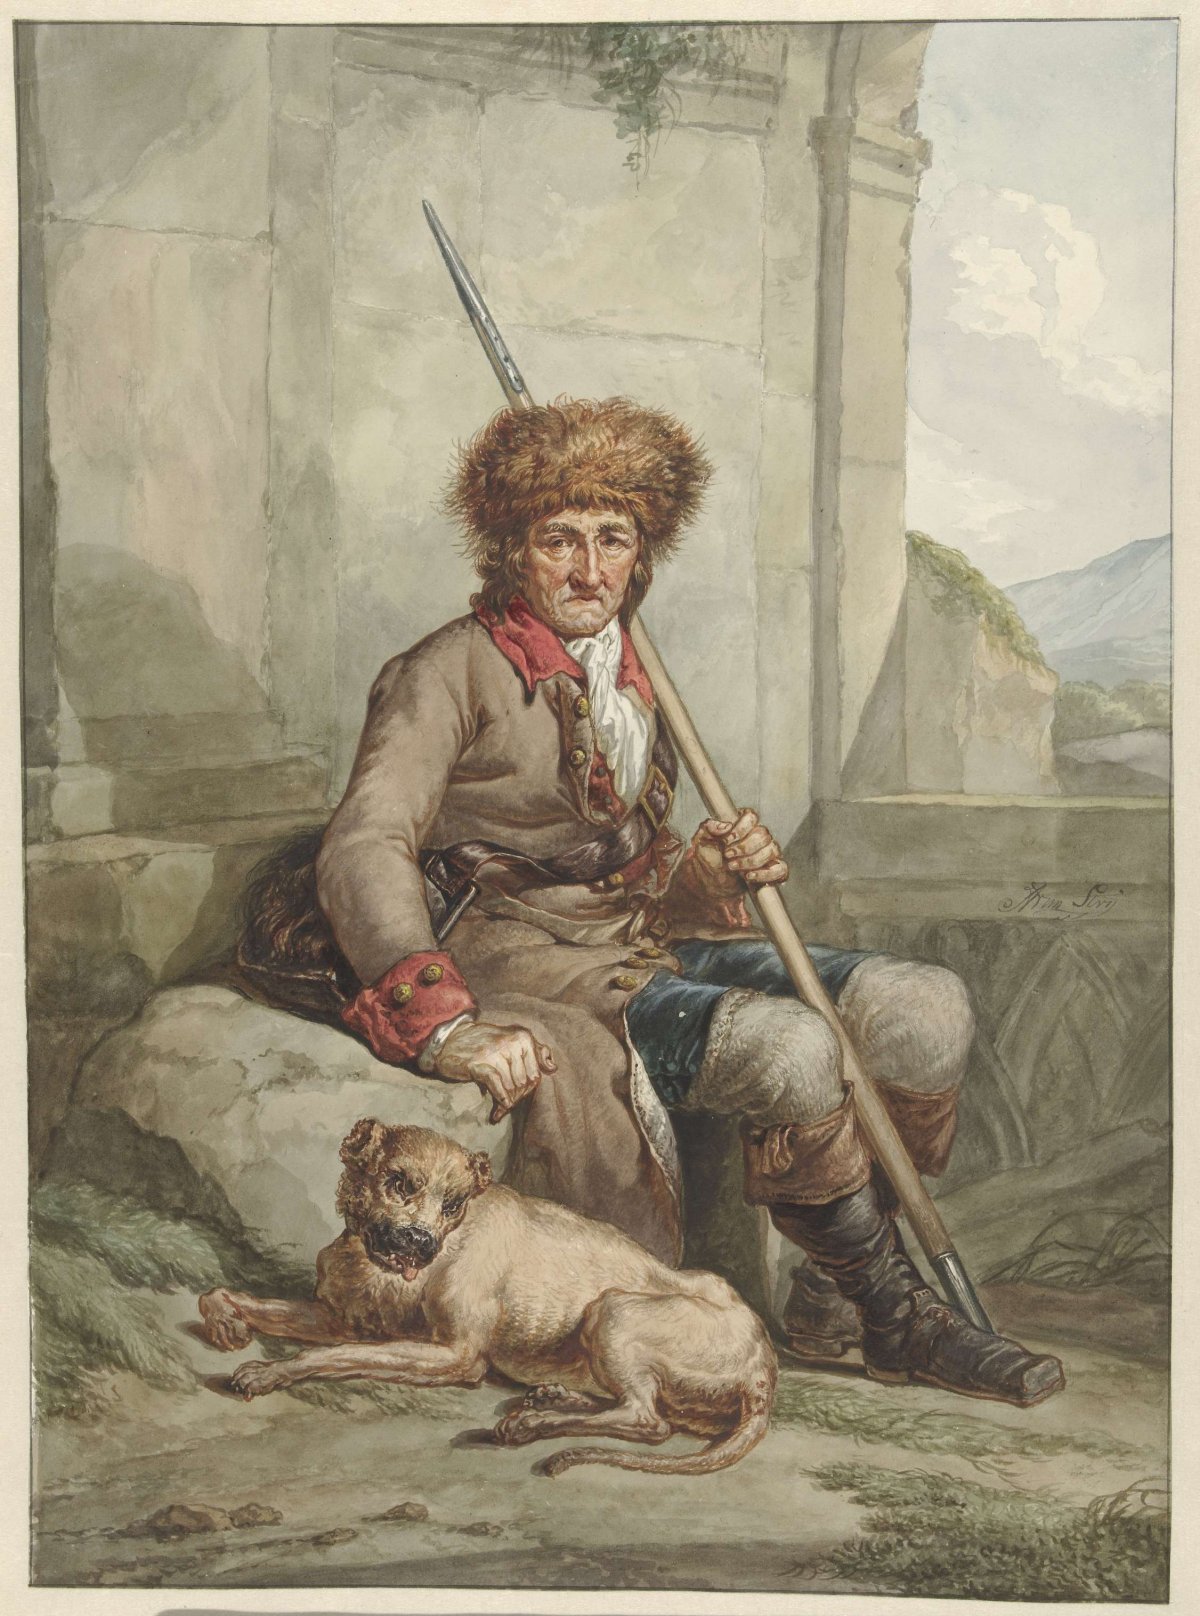 Seated hunter with fur hat, spear and weasel bag, Abraham van Strij (I), 1763 - 1826